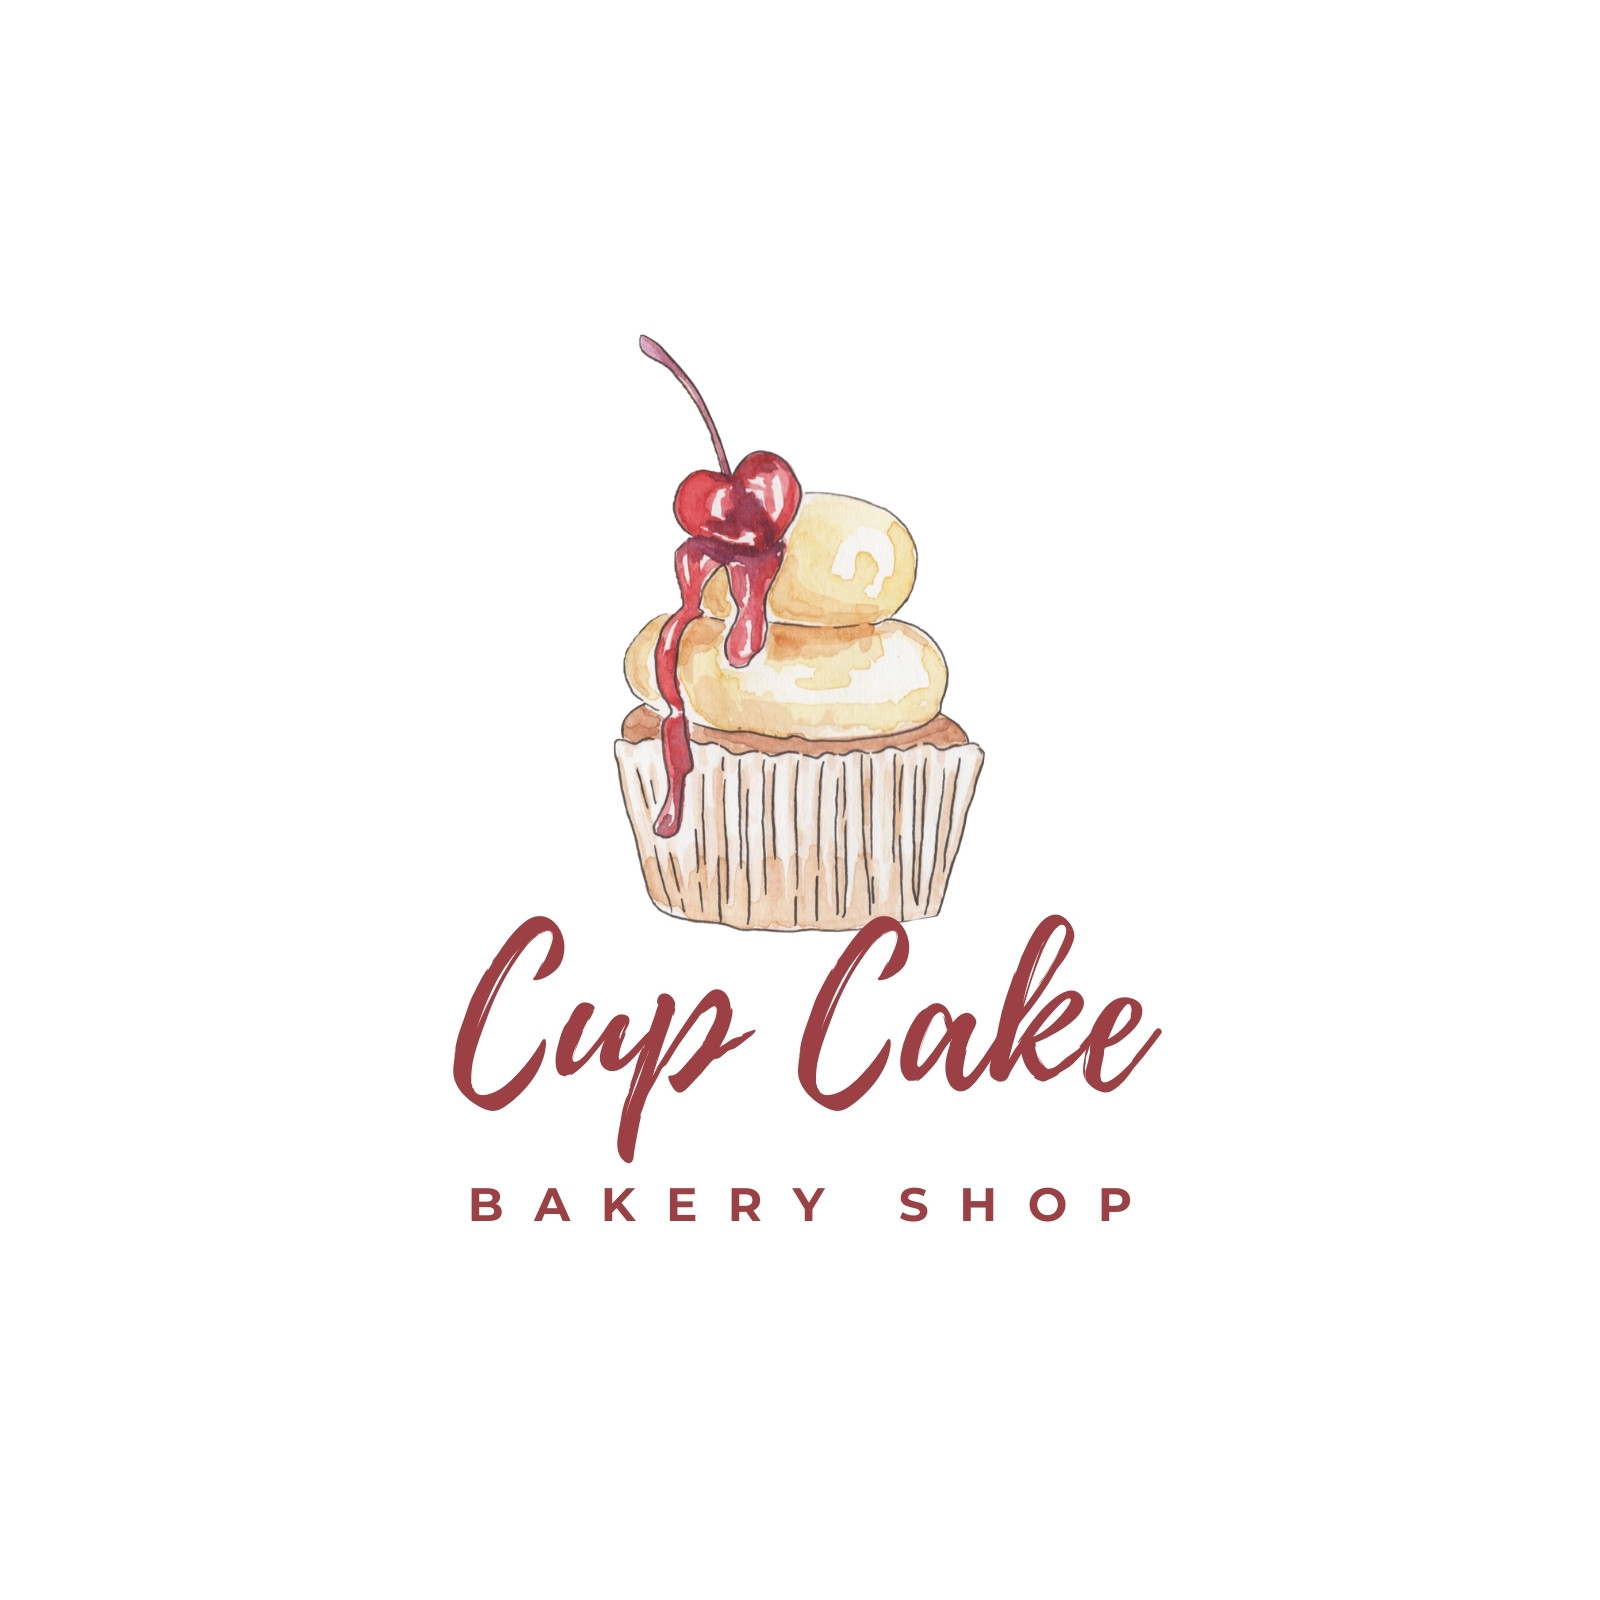 LUCKNOW'S FAVOURITE CAKE DESTINATION 🍰💯 👨‍🍳 FRESH BAKED CAKES 🚚 FREE  HOME DELIVERY 🤌 CUSTOMISED CAKES 💸 REASONABLE PRICE For your… | Instagram